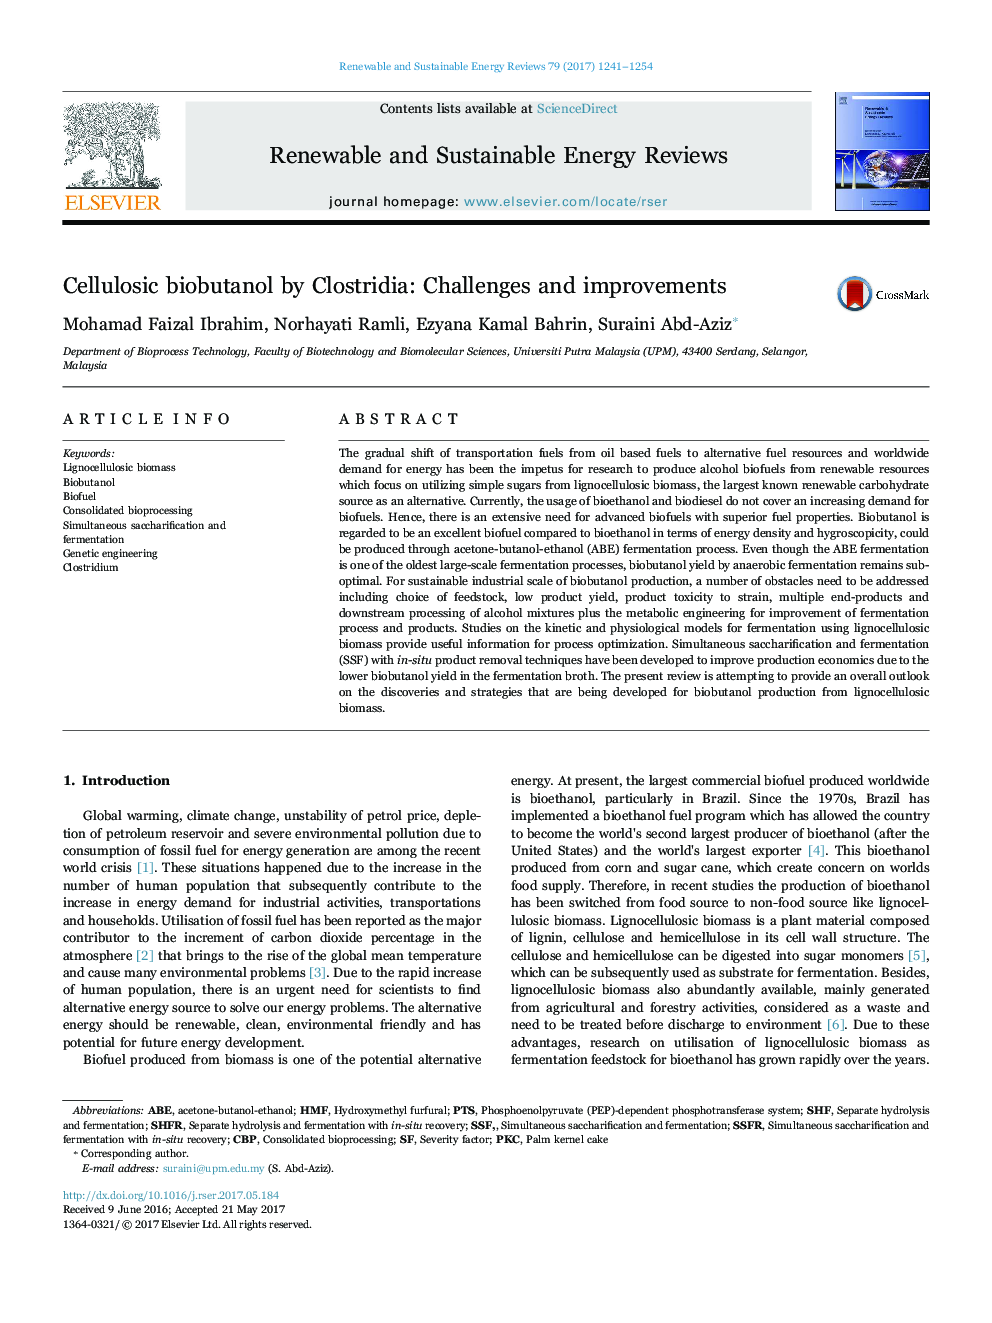 Cellulosic biobutanol by Clostridia: Challenges and improvements